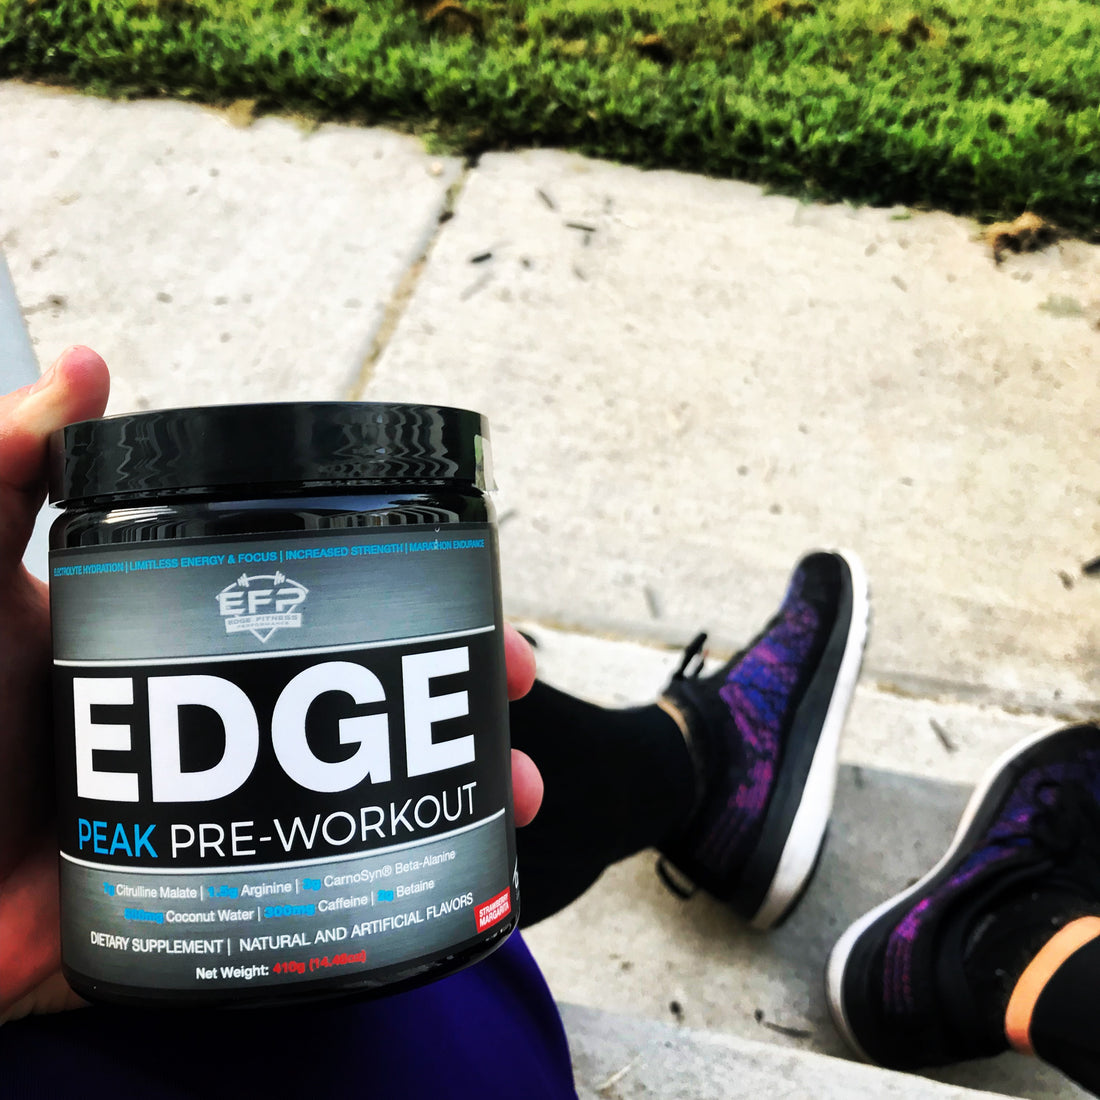 Supplement Review of EDGE Peak Pre-Workout